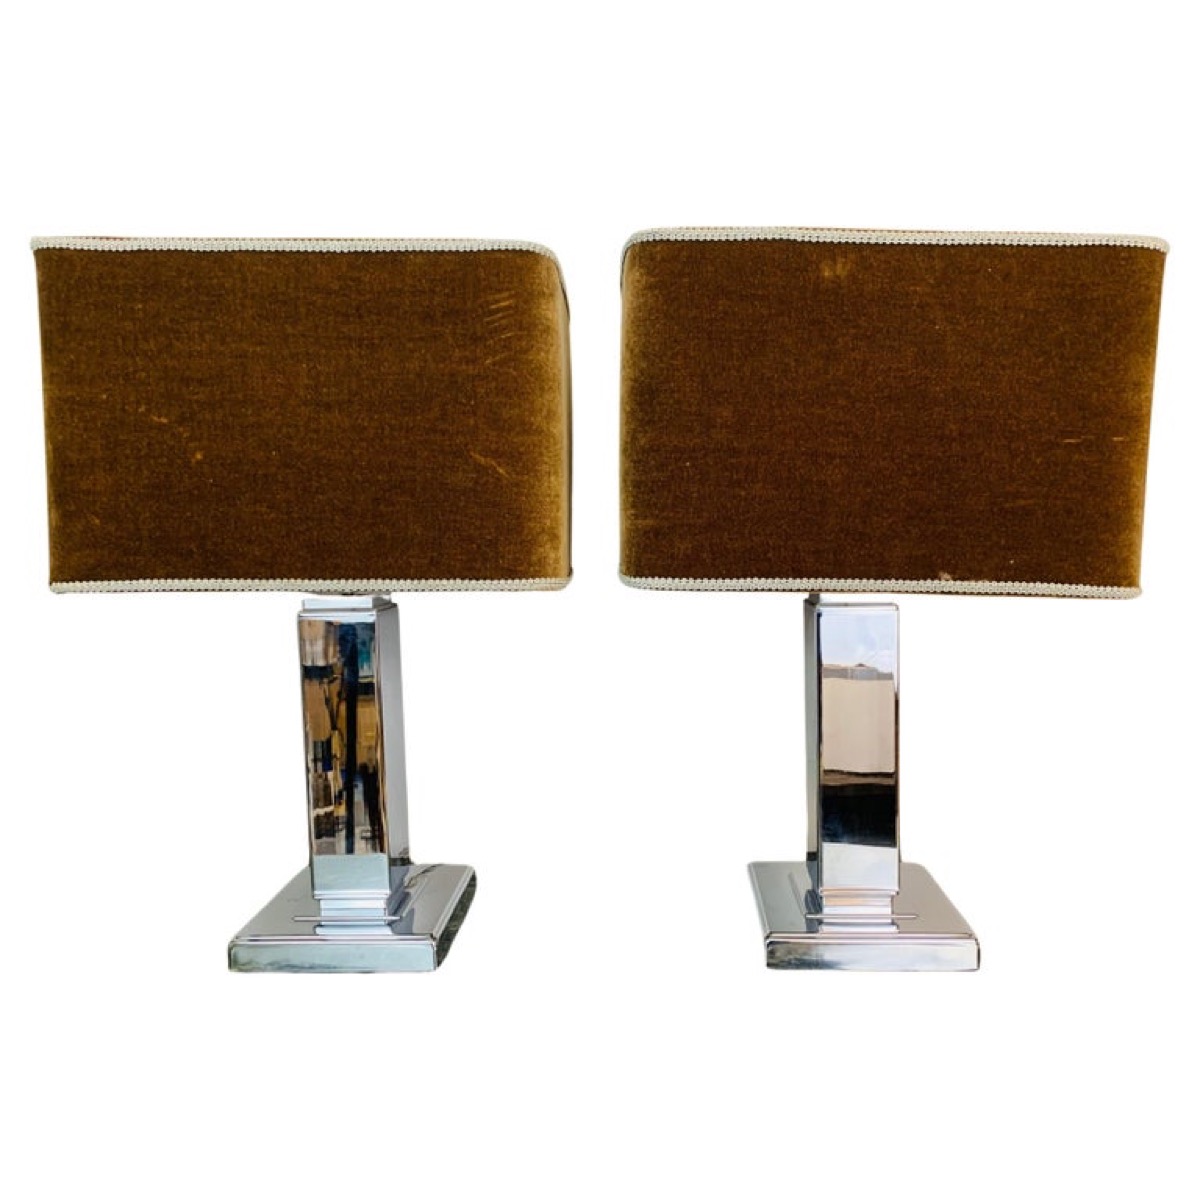 Pair of 1970s Square Chrome Table Lamps inc Original Shades